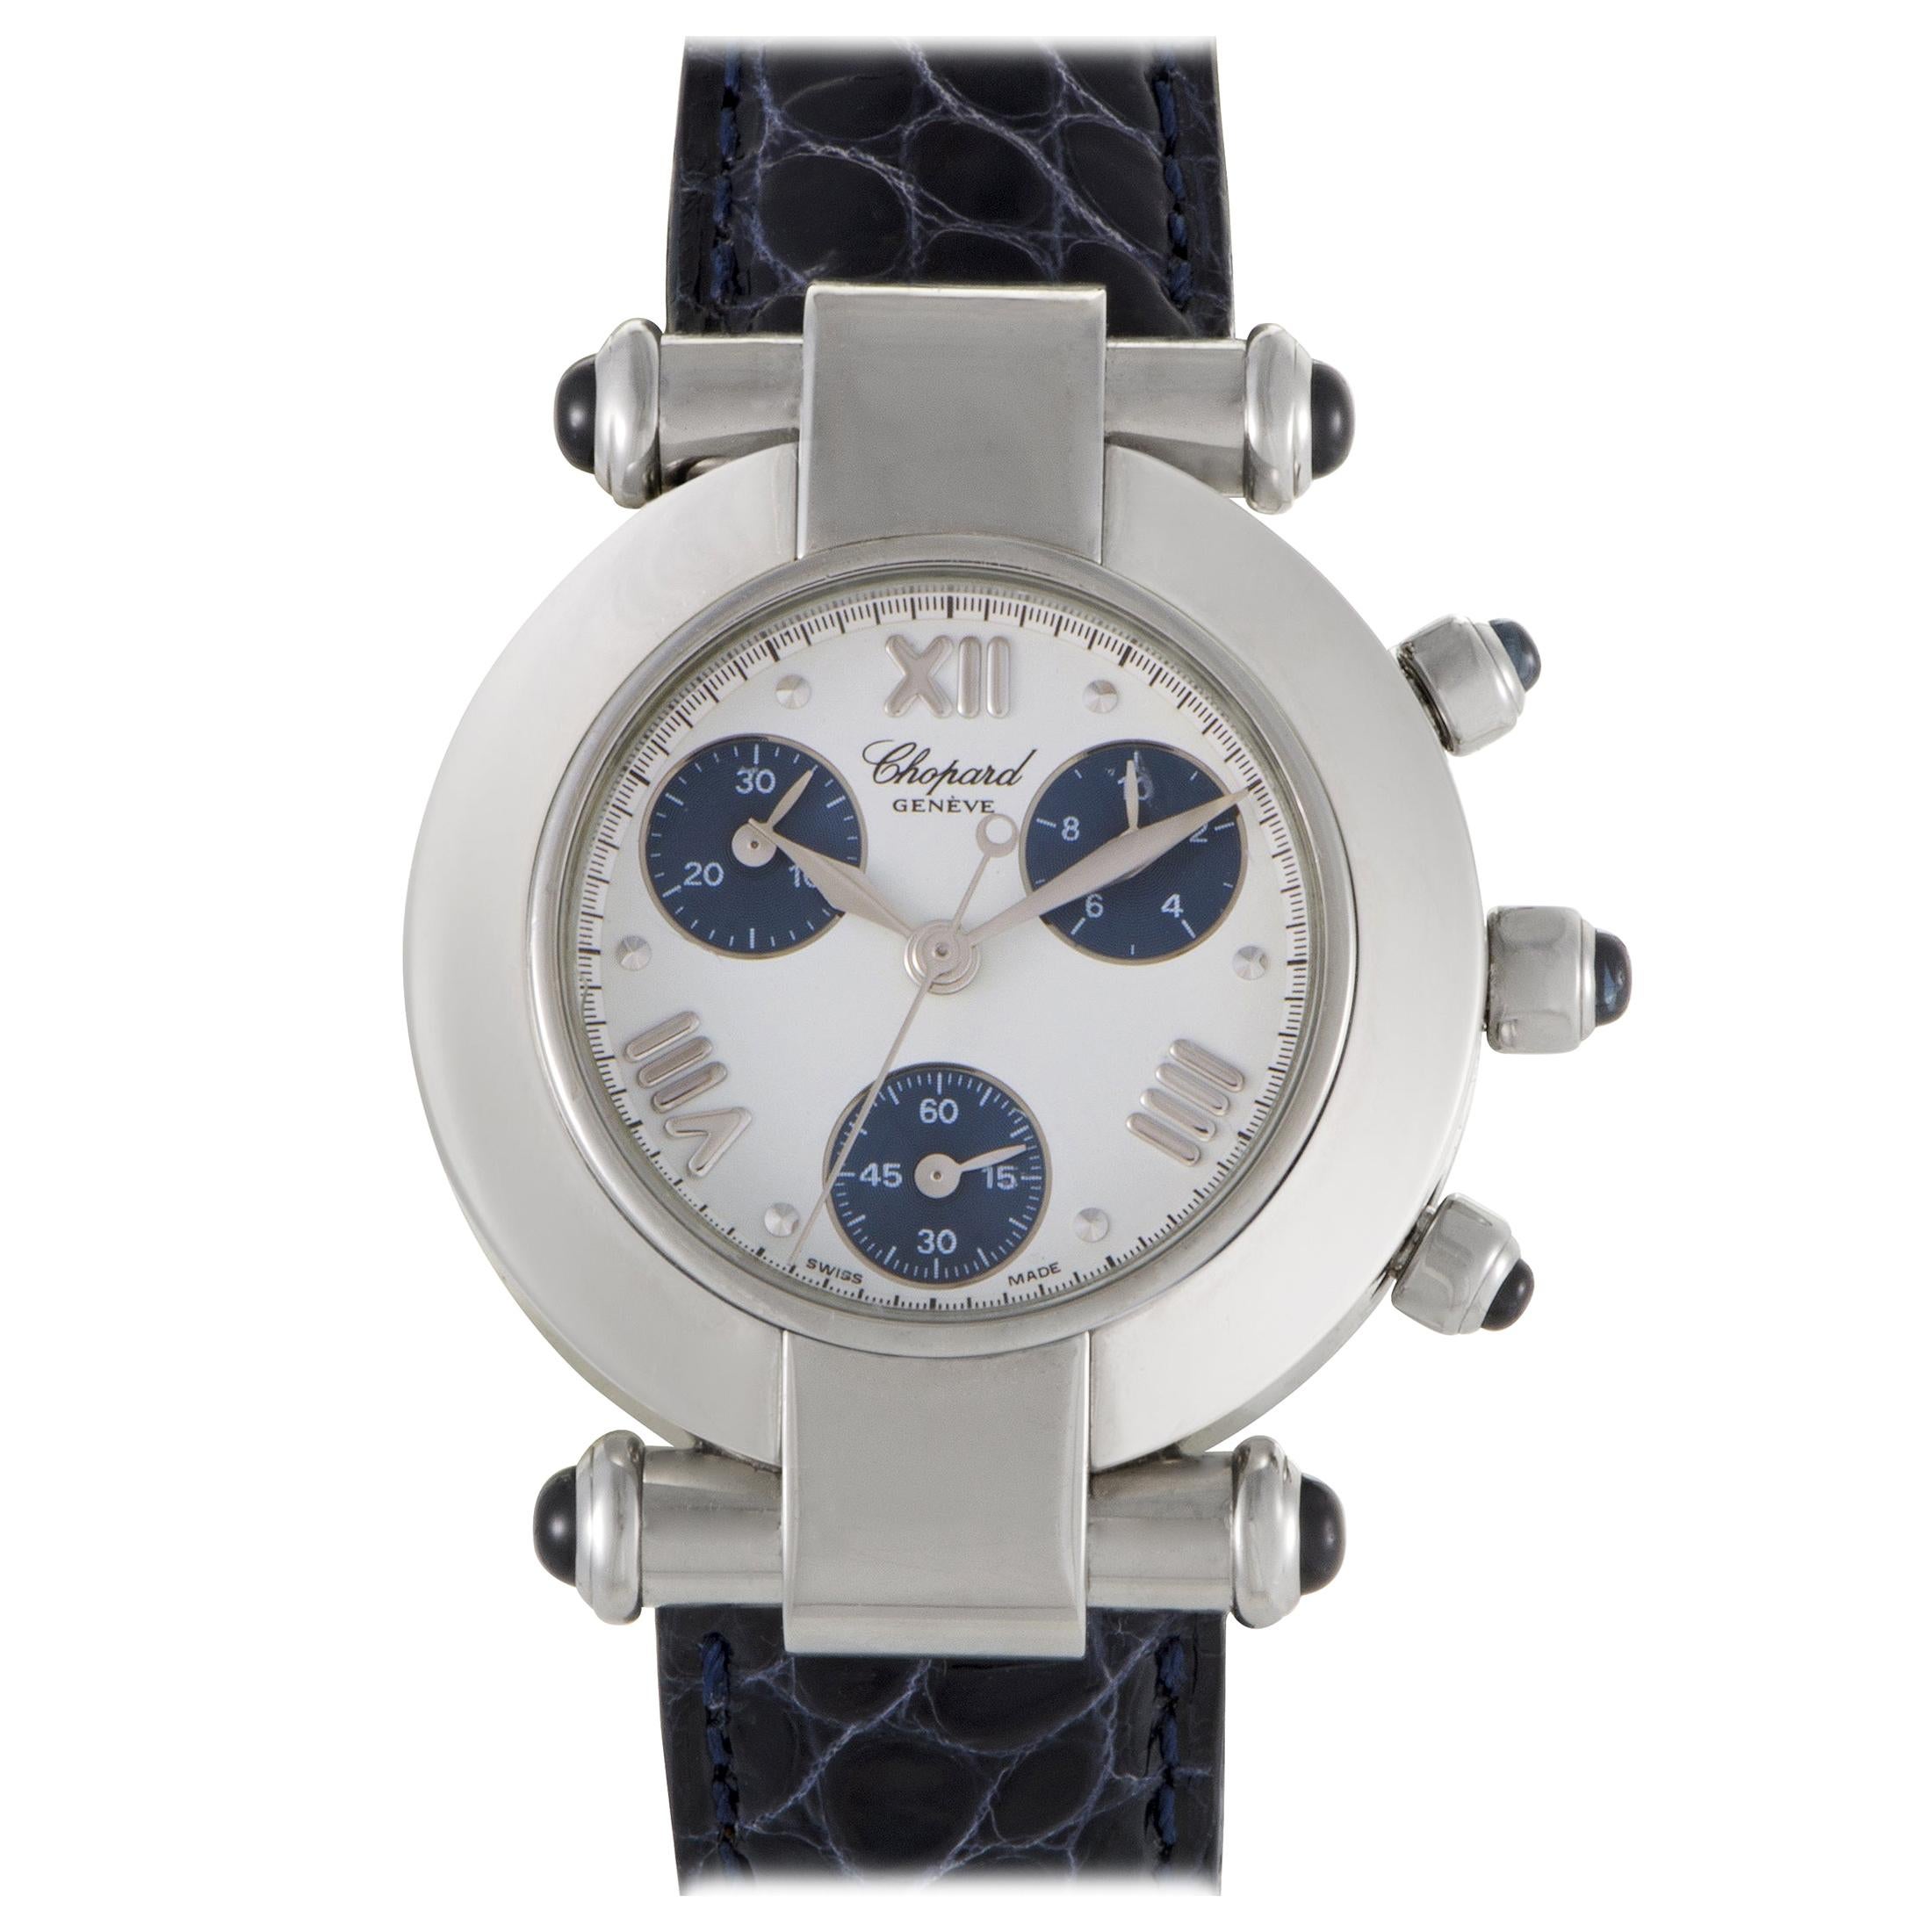 Chopard Imperiale Chronograph Women's Watch 388378-3001